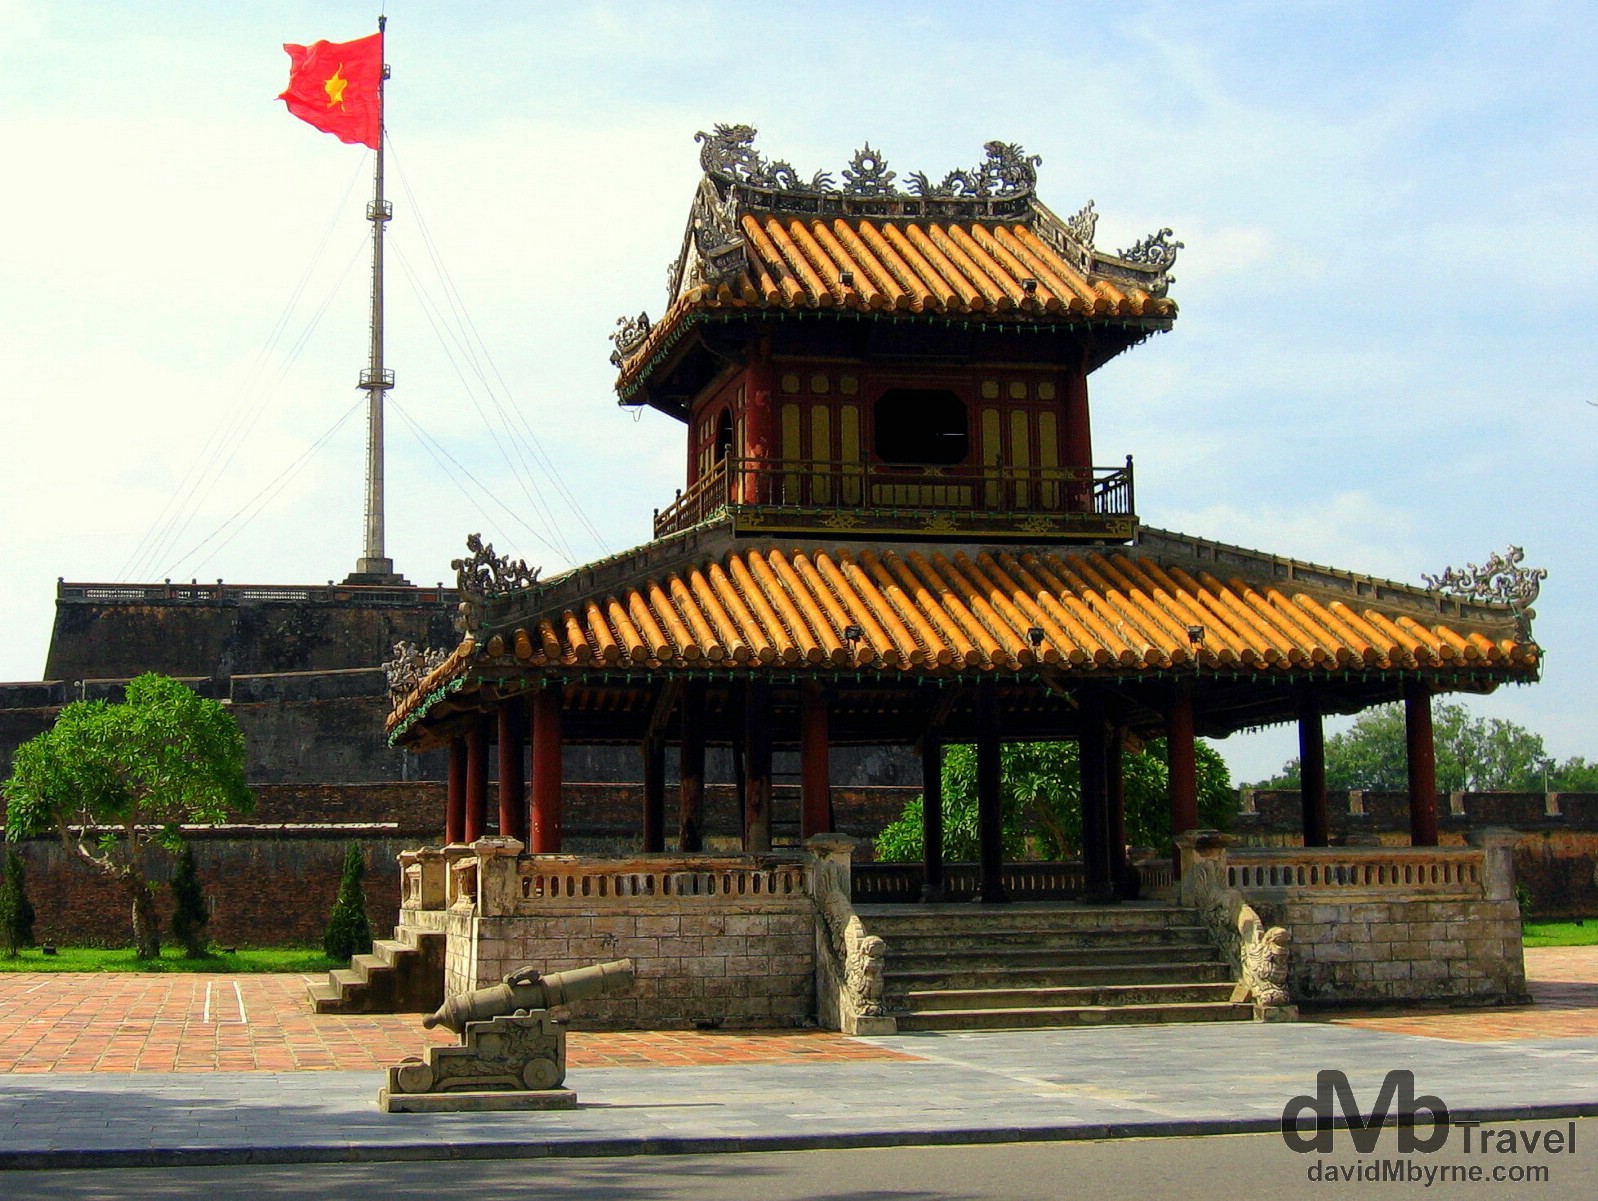 Fronting the UNESCO-listed Citadel in Hue, central Vietnam. September 7th, 2005.